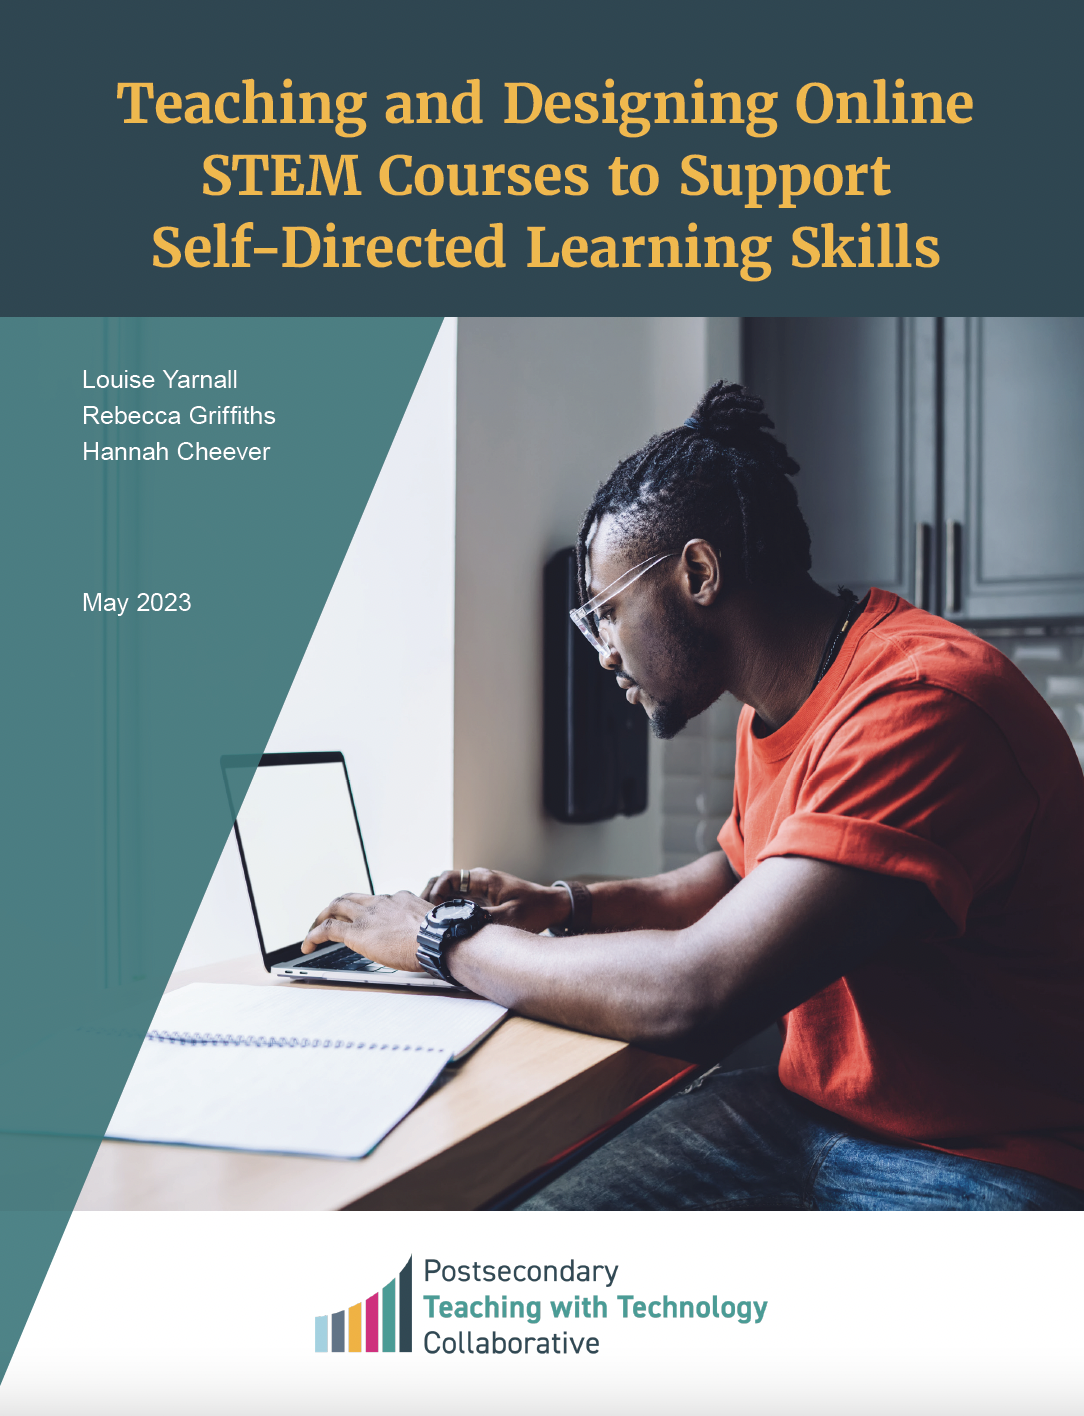 Teaching and Designing Online STEM Courses to Support Self-Directed Learning Skills